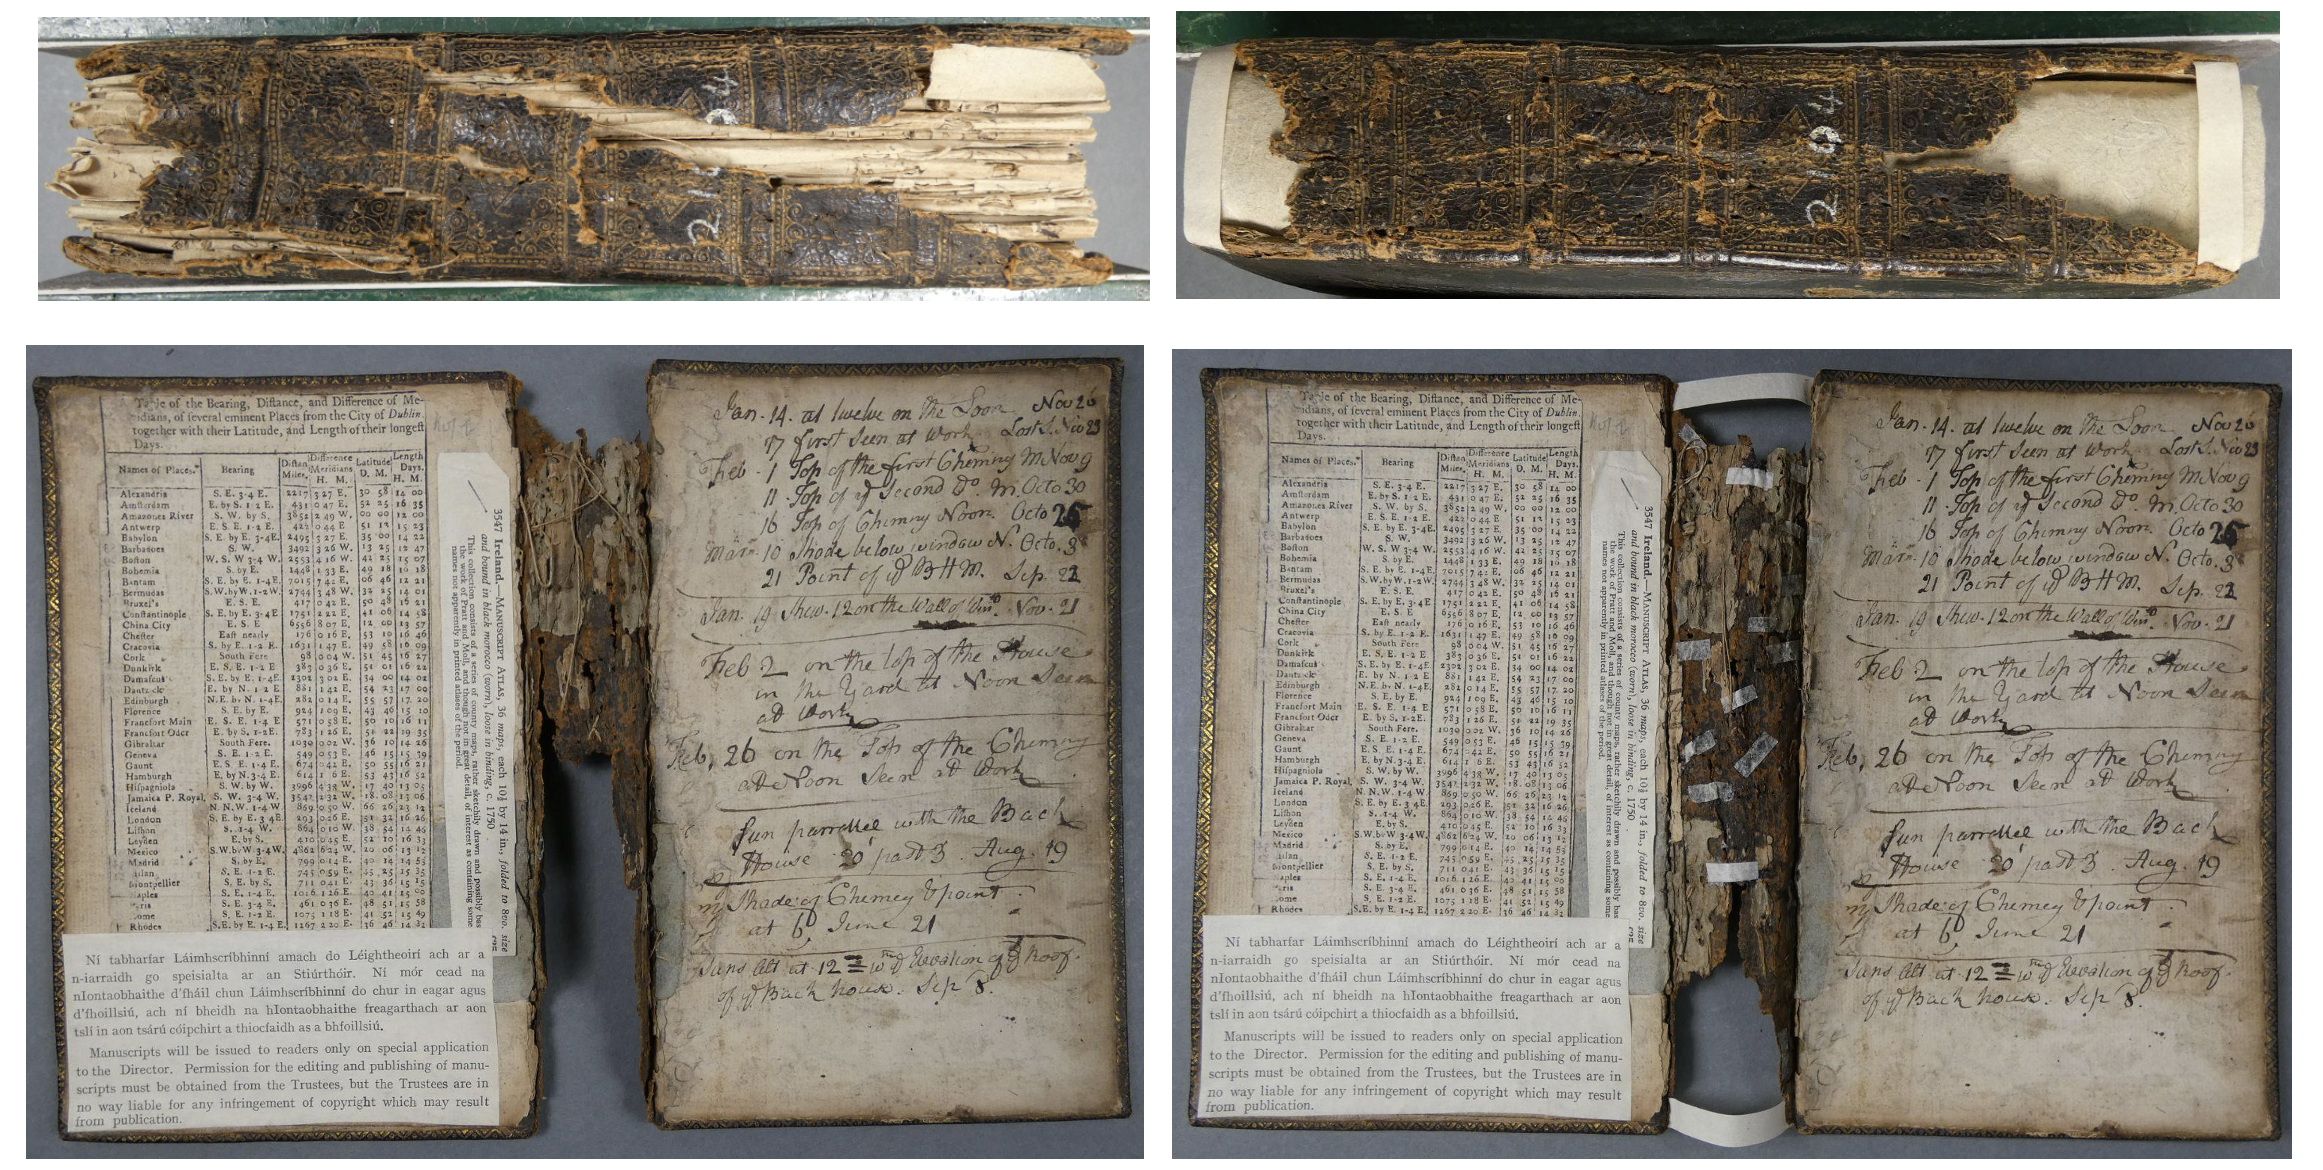 MS 2104, leather cover before and after treatments © NLI/Nina de Angelis